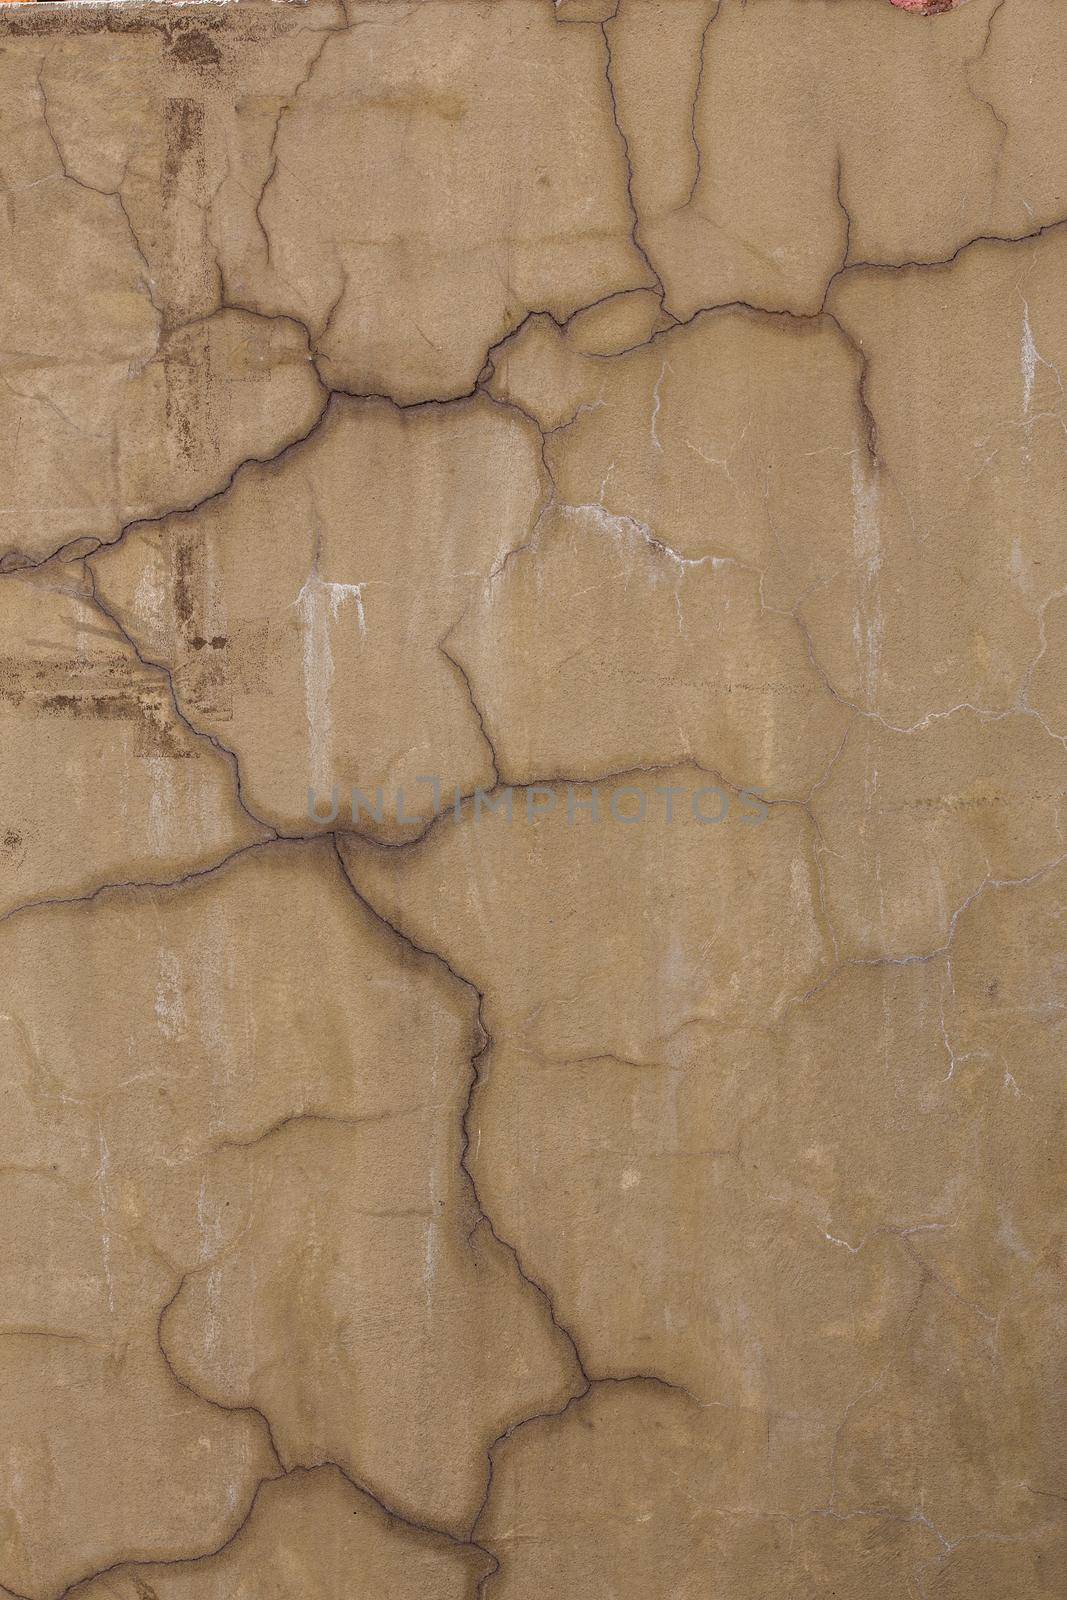 grey dirty cracked plaster wall - flat texture and full frame background by z1b